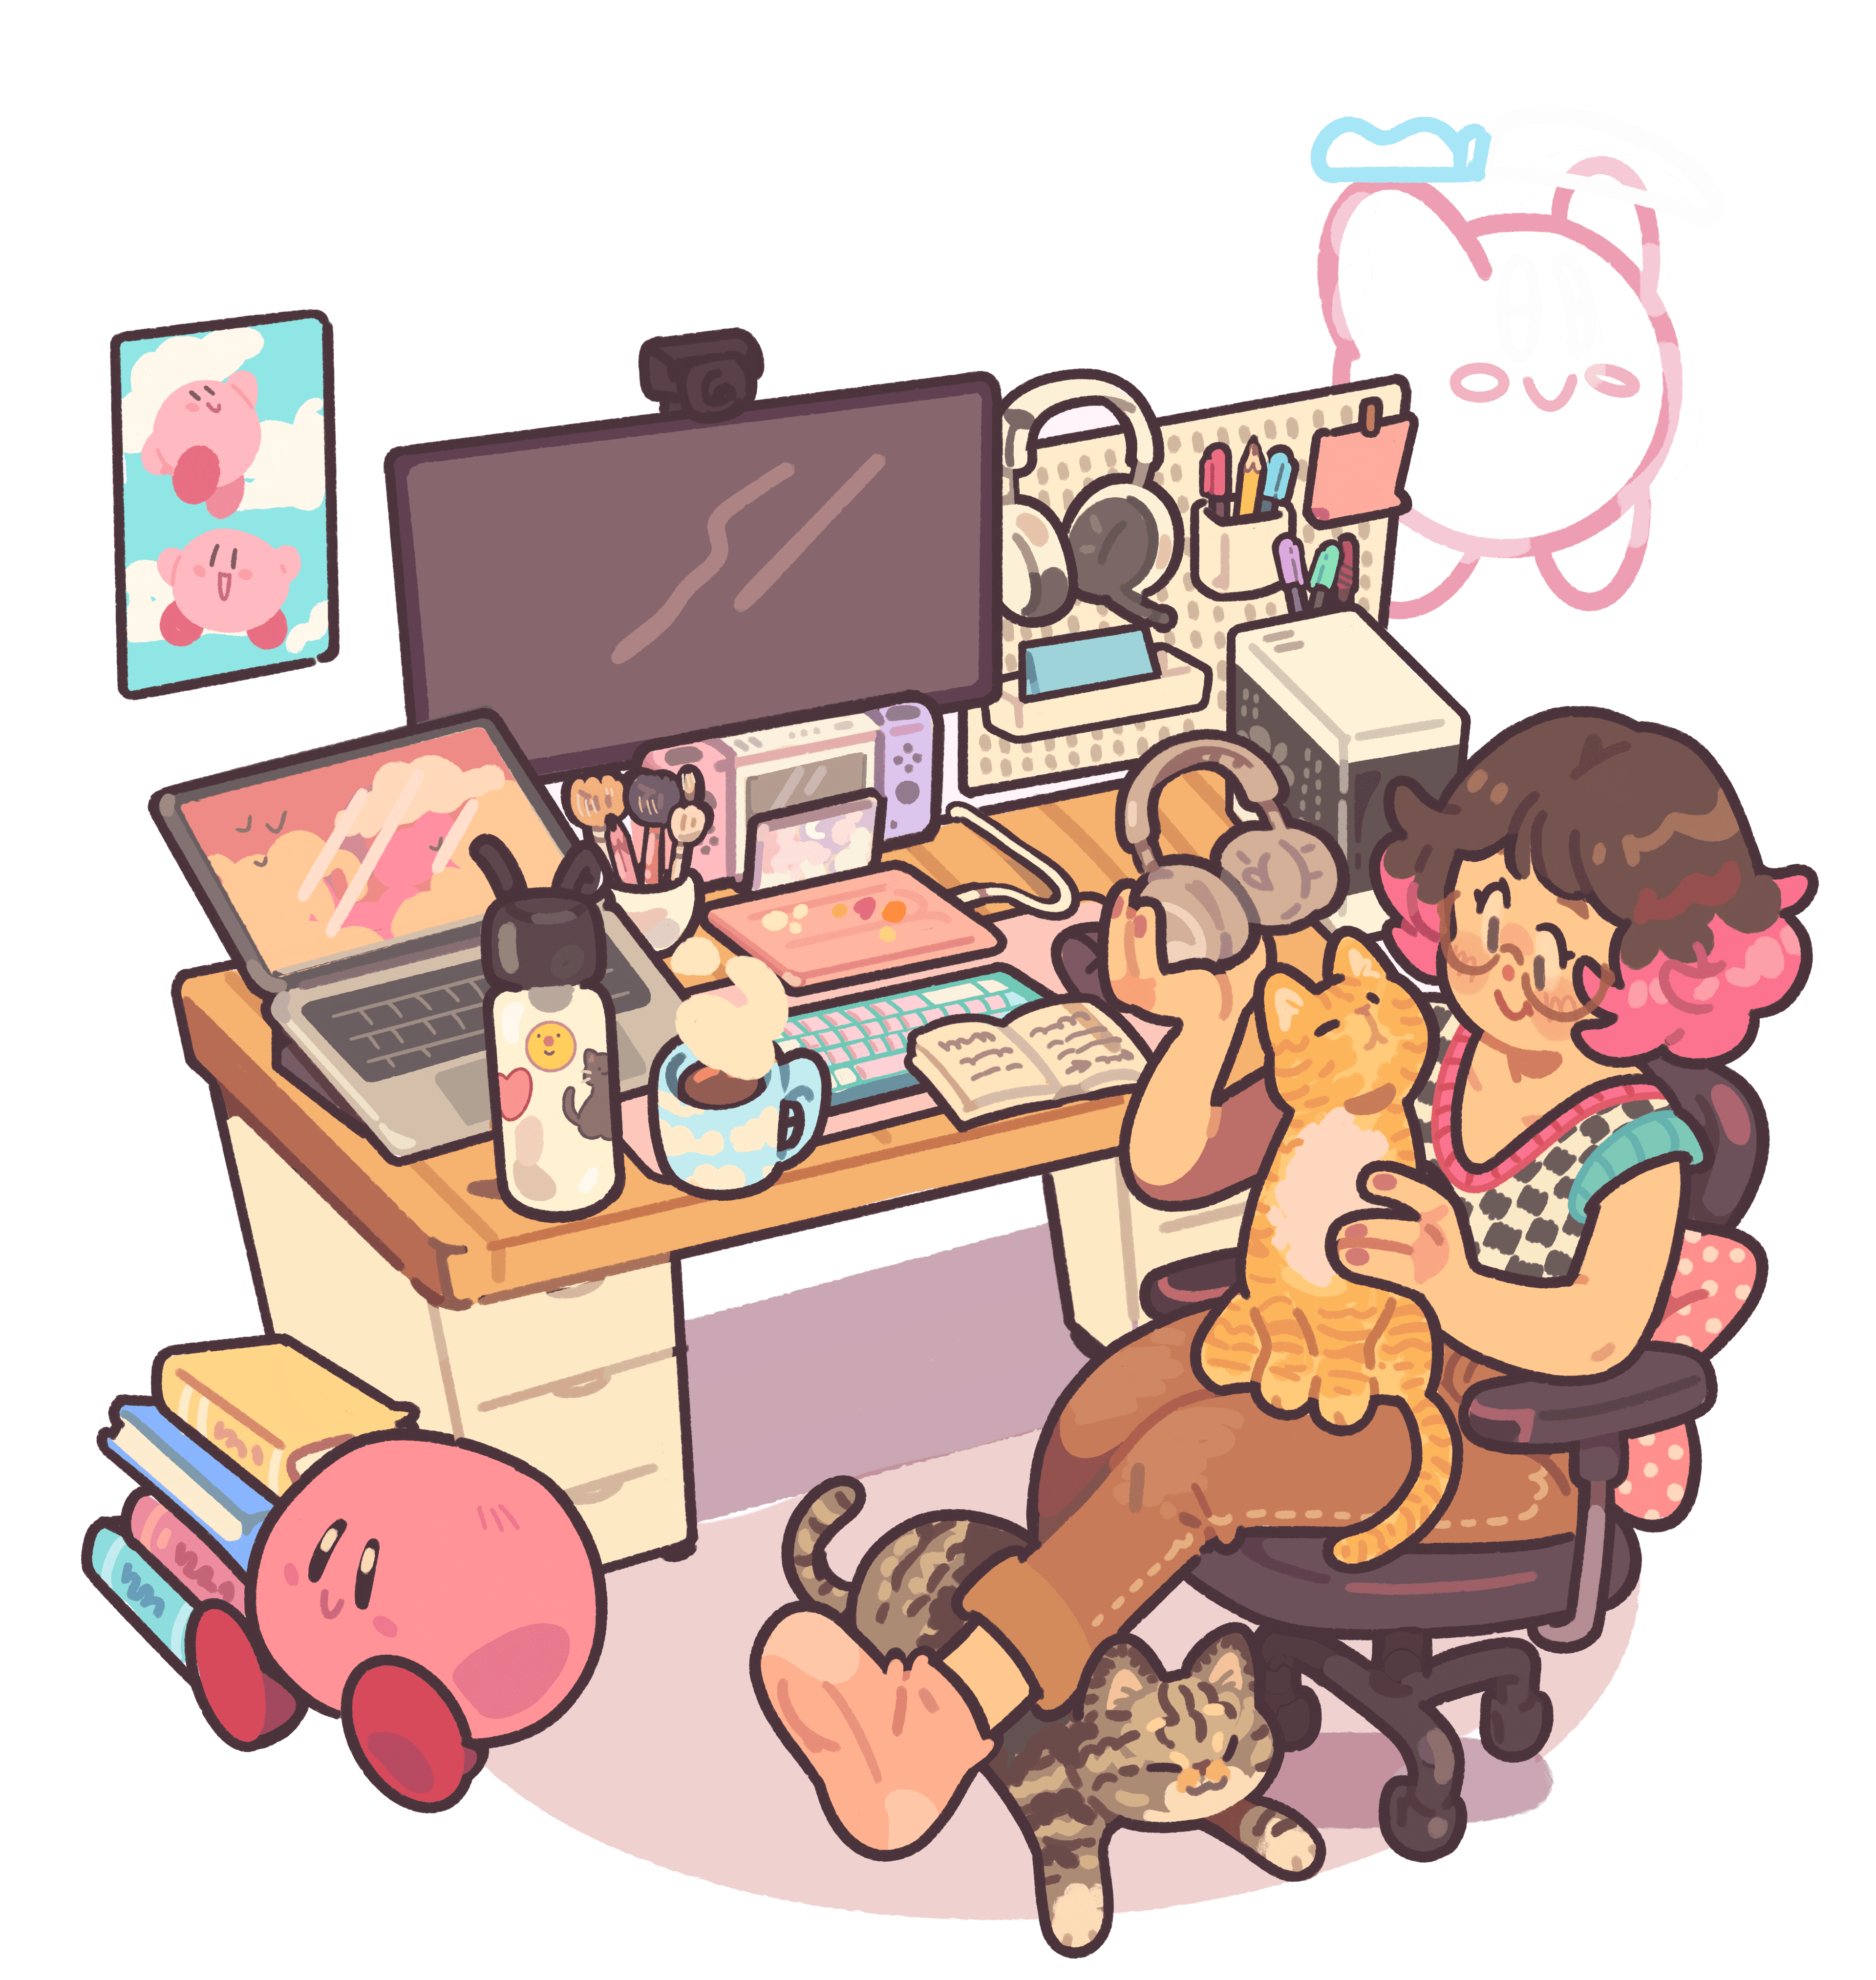 Art of Breezy Fasano at their desk, with their 2 cats: Momo, a brown tabby and Noodle, an orange tabby.